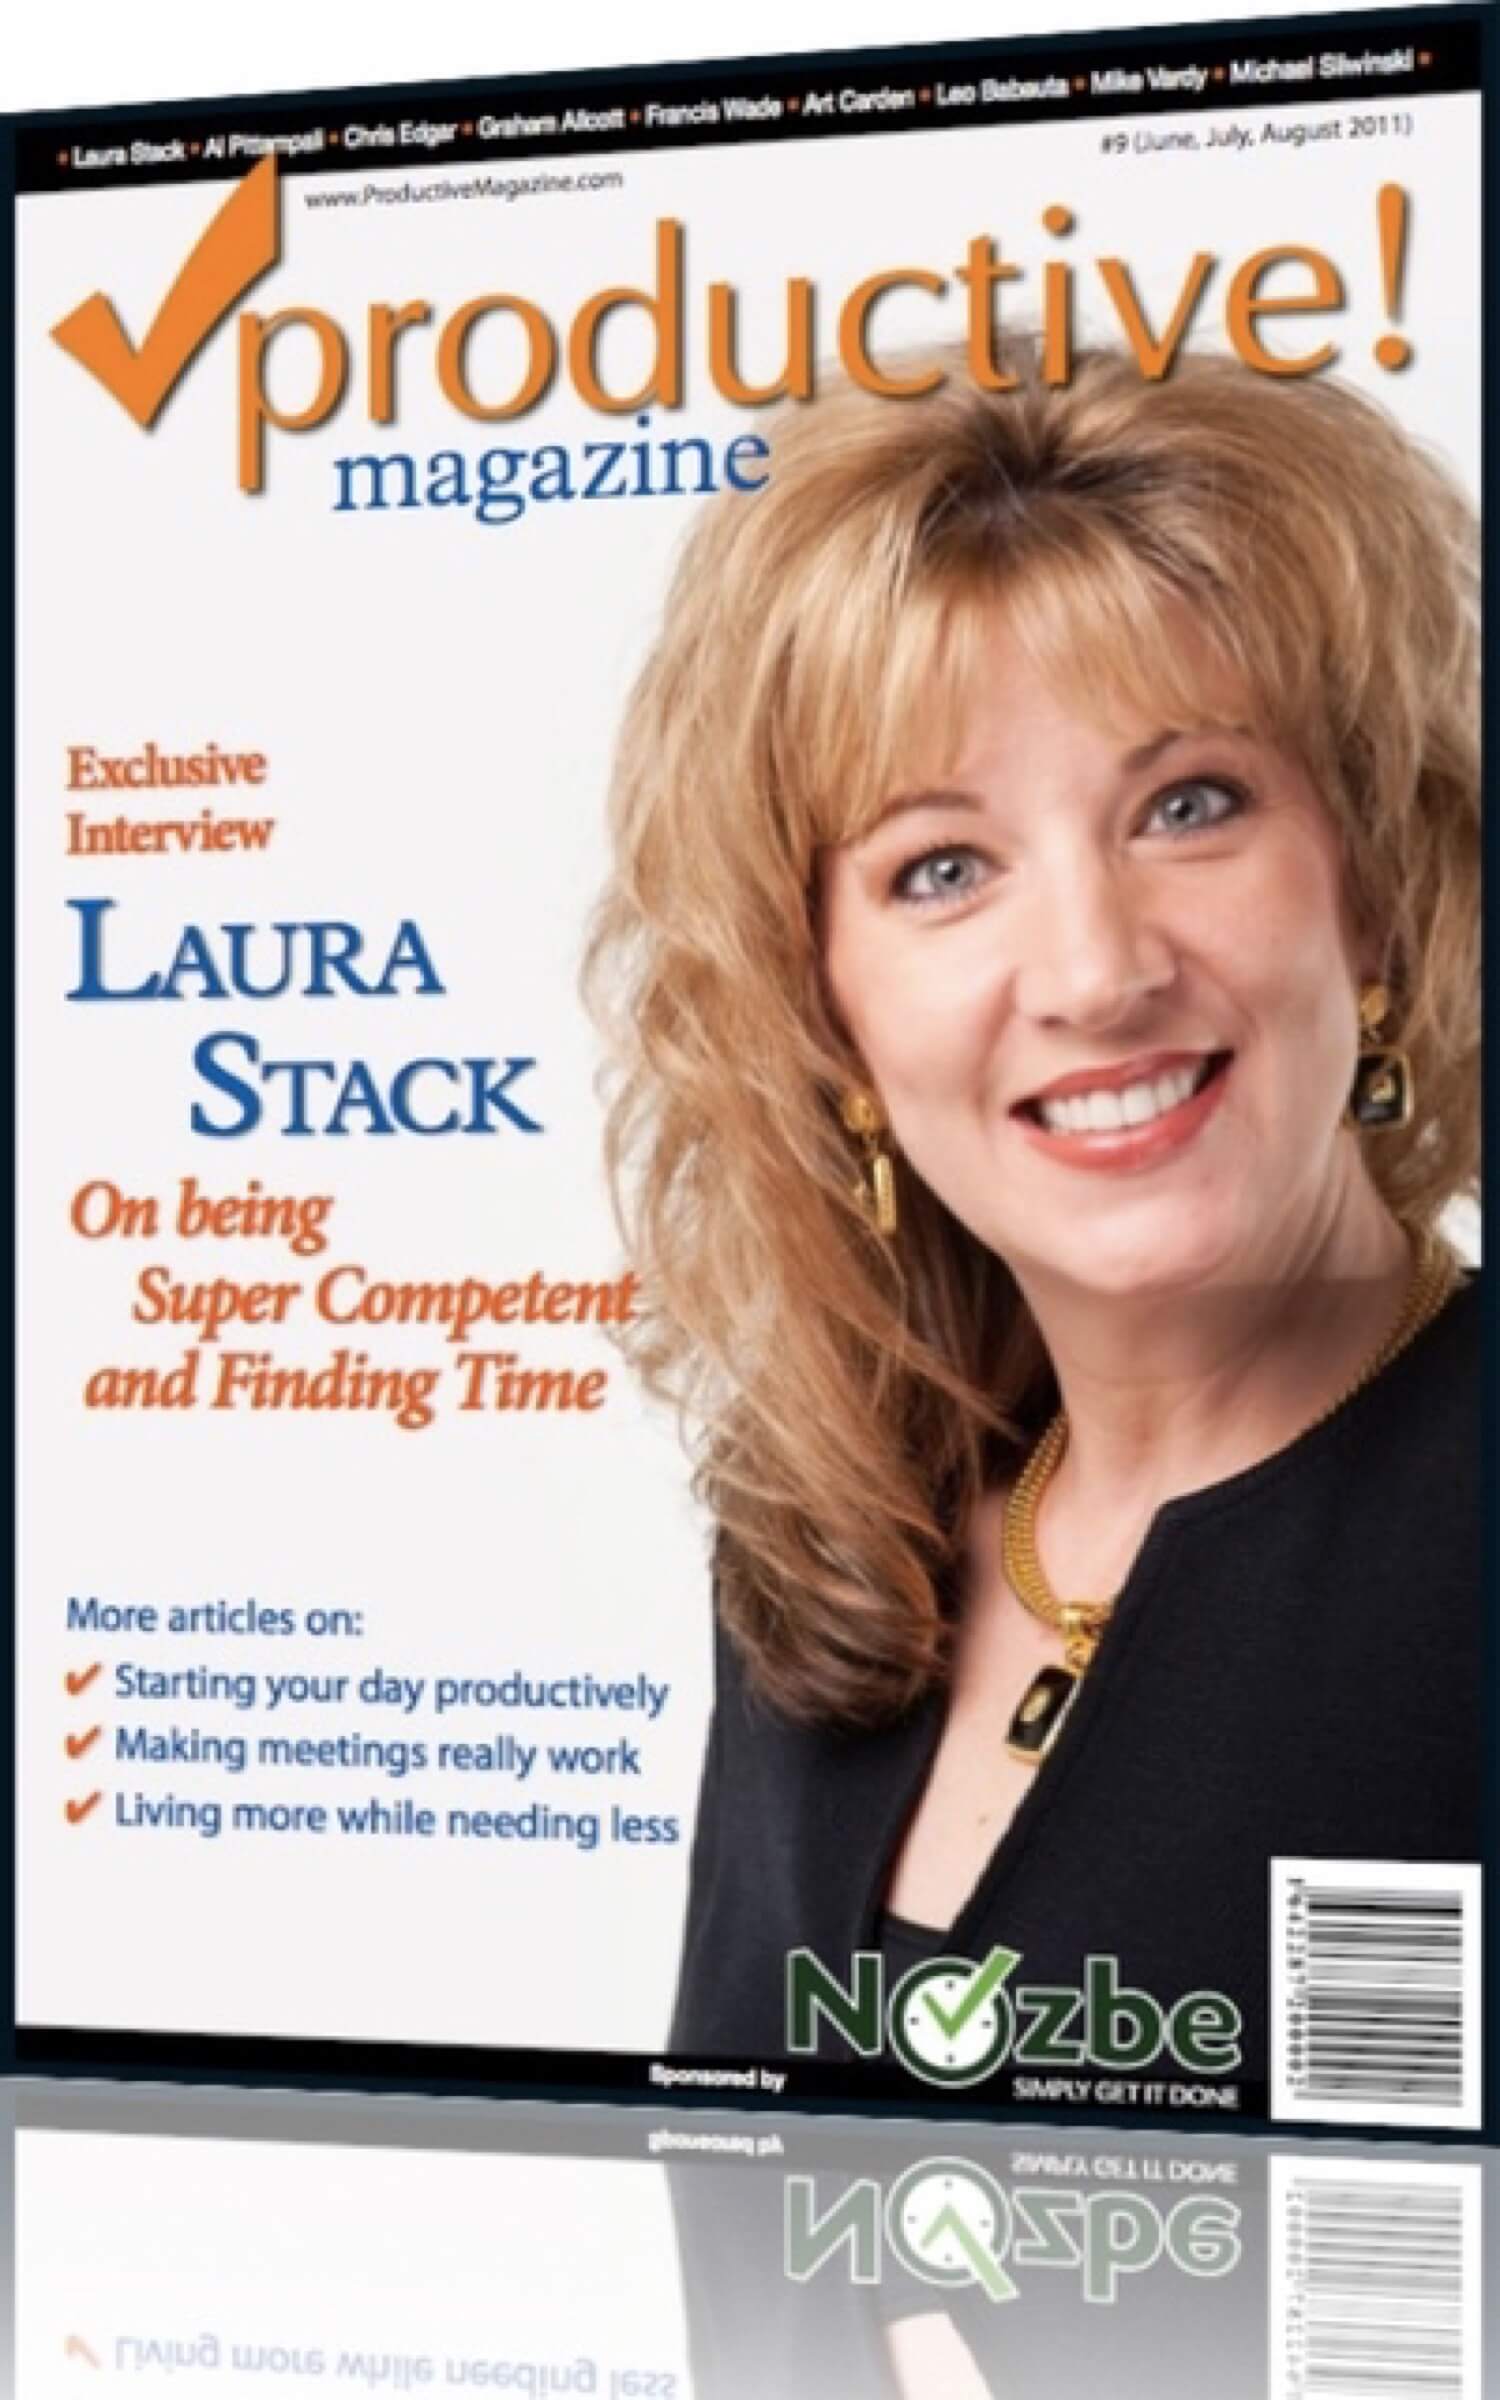 Productive! Magazine #9 PDF with Laura Stack is out!